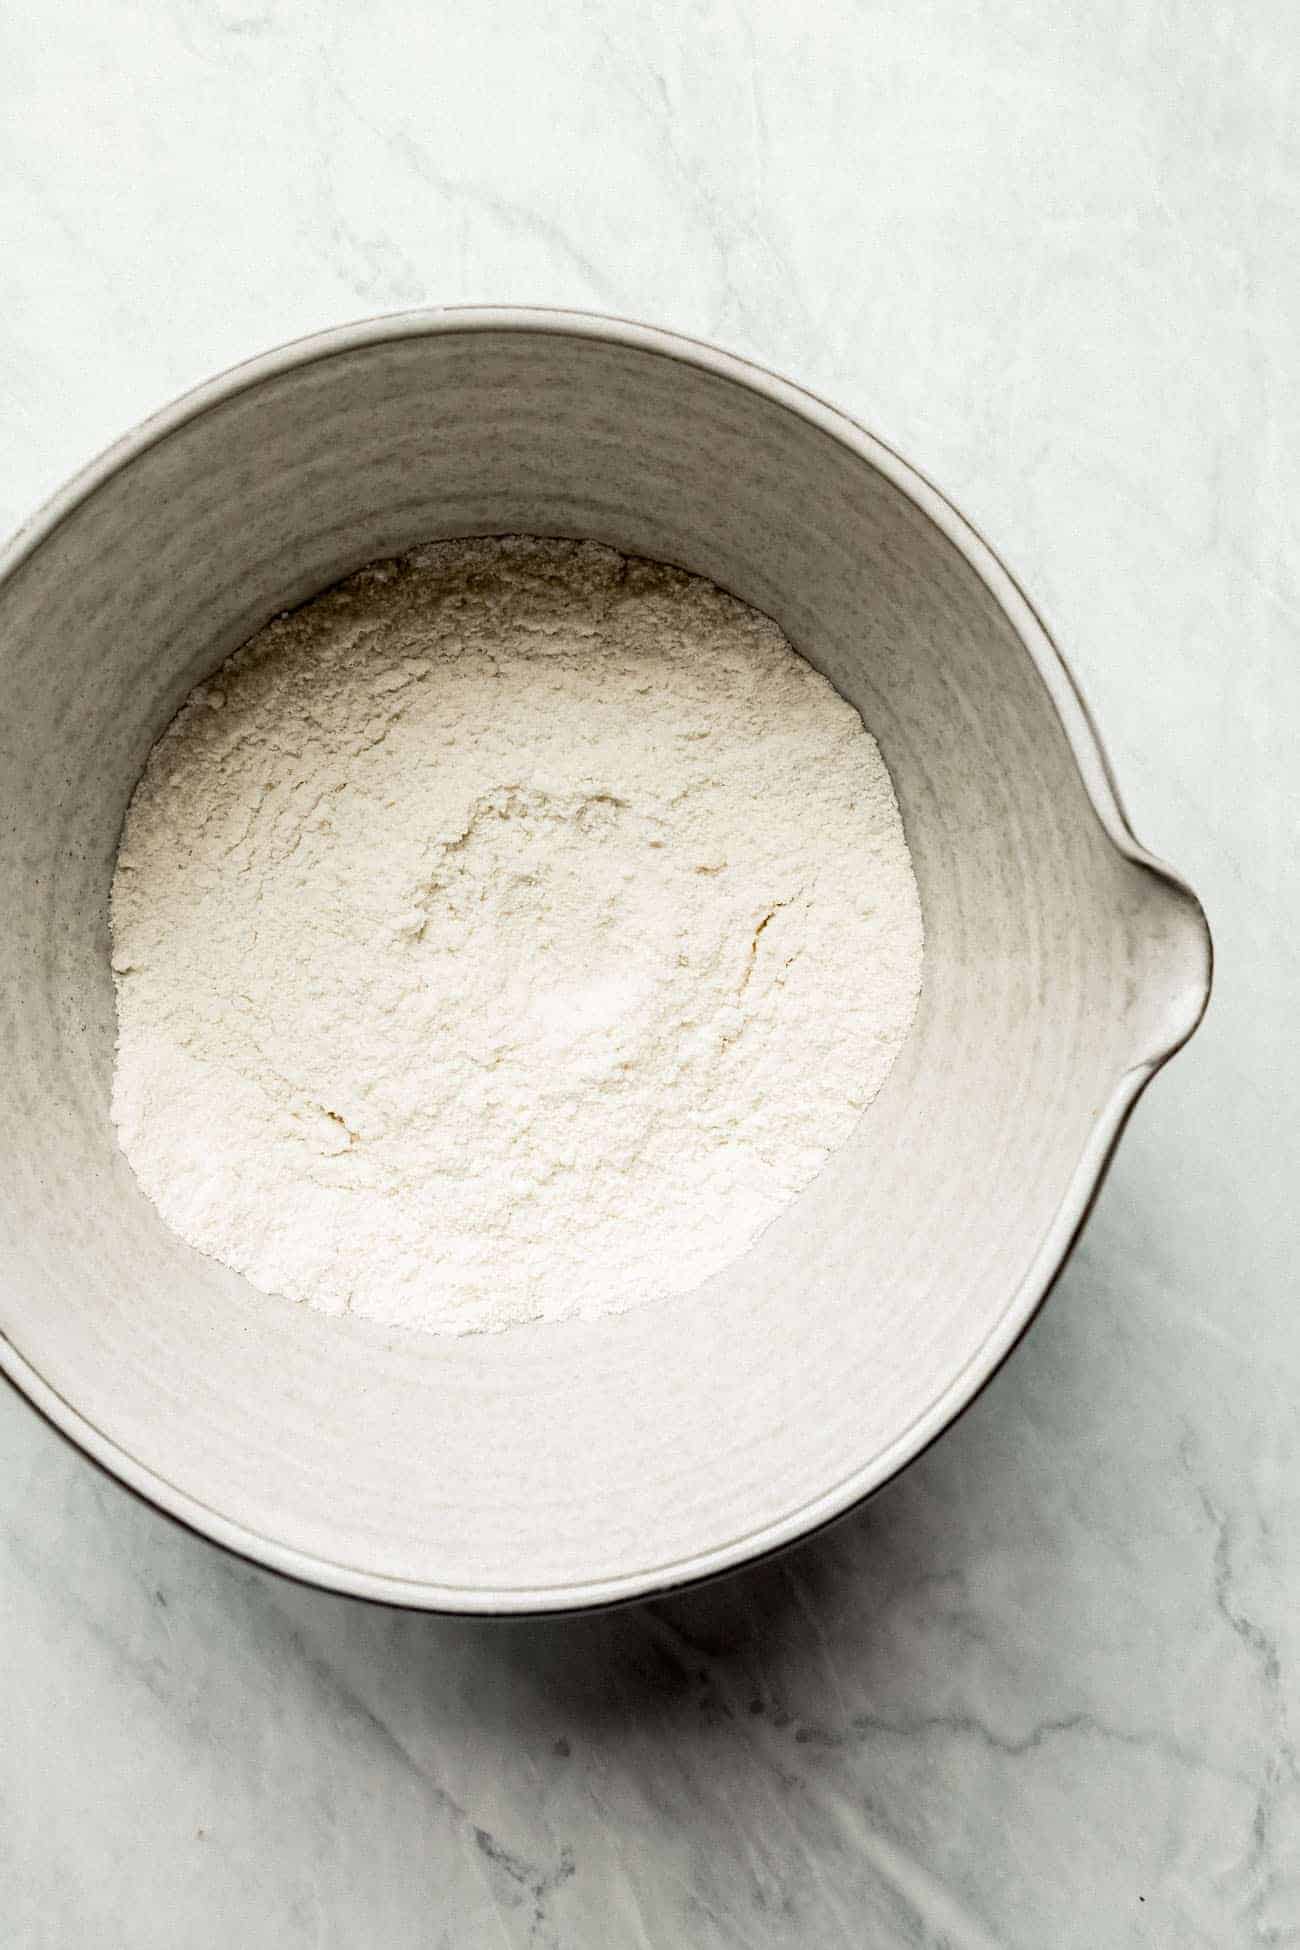 blend of dry ingredients and flours in a white ceramic bowl